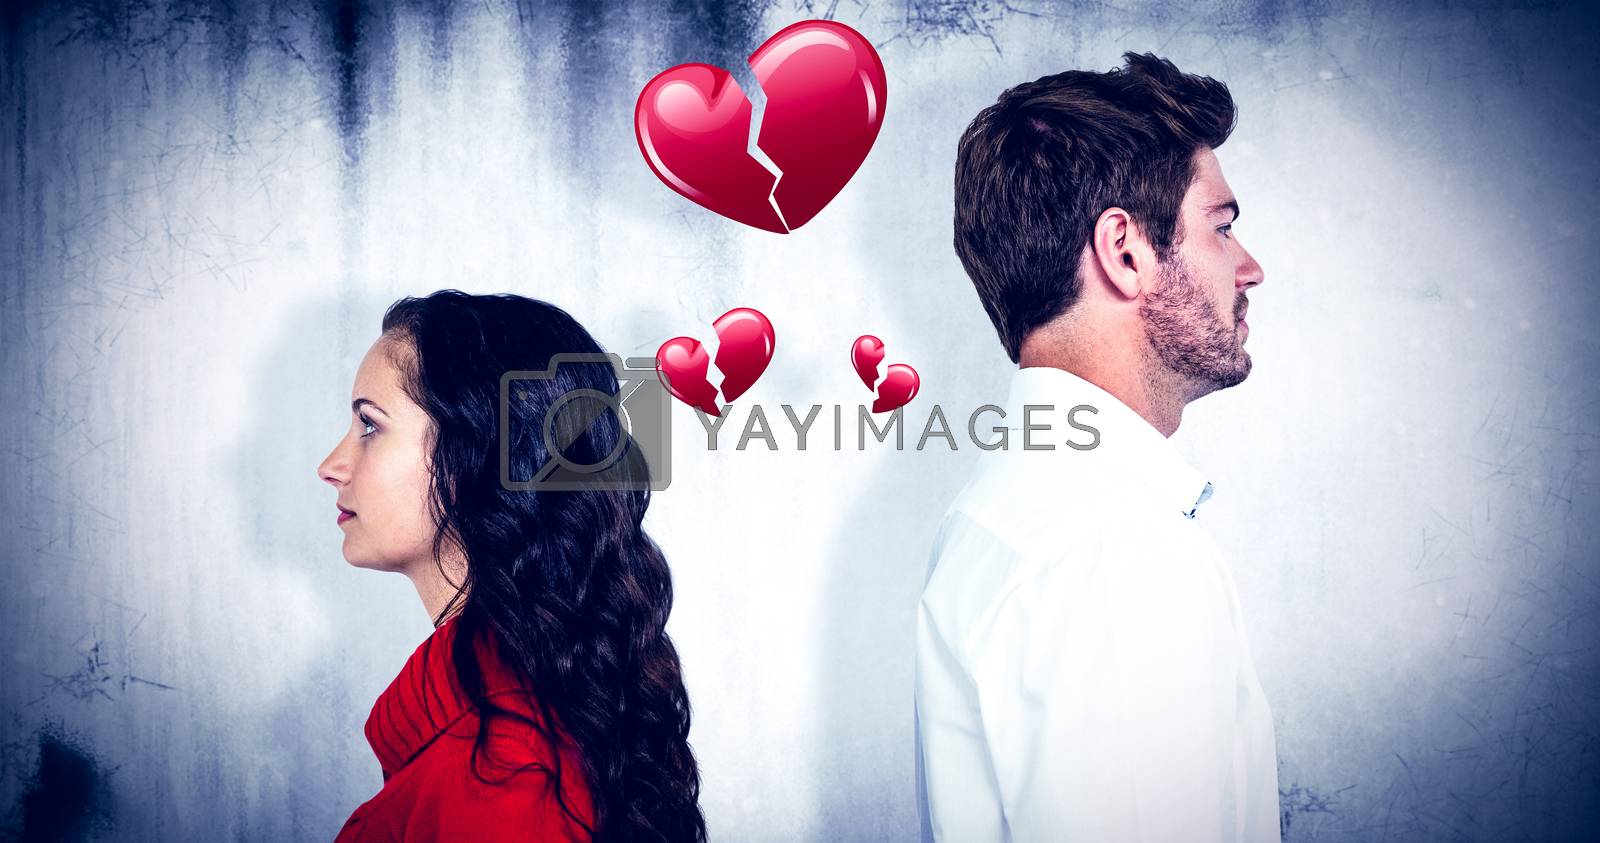 Royalty free image of Composite image of couple standing back to back after arguing by Wavebreakmedia